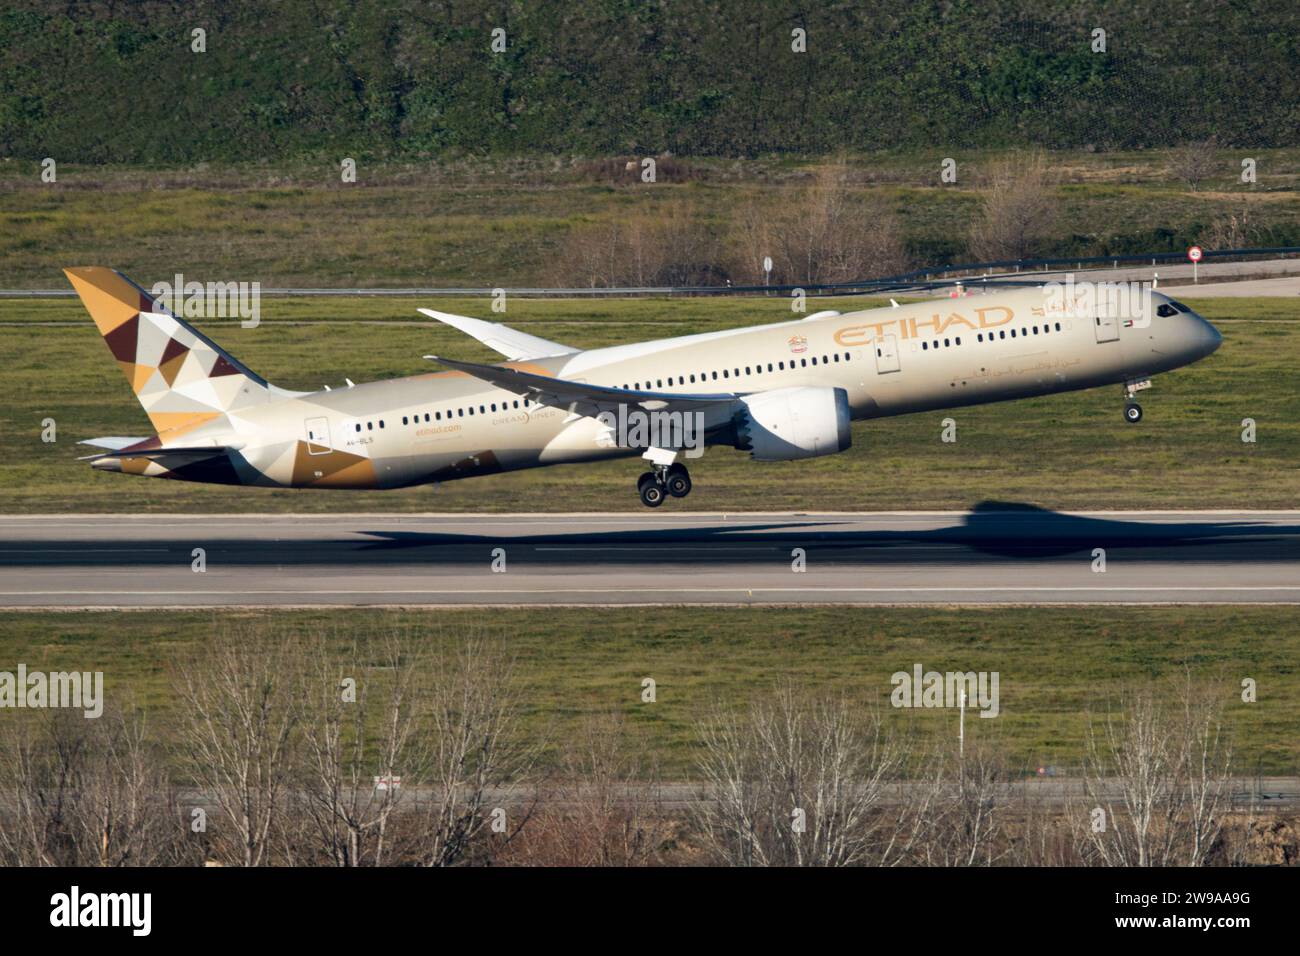 Boeing 787 airliner of the Etihad airline Stock Photo